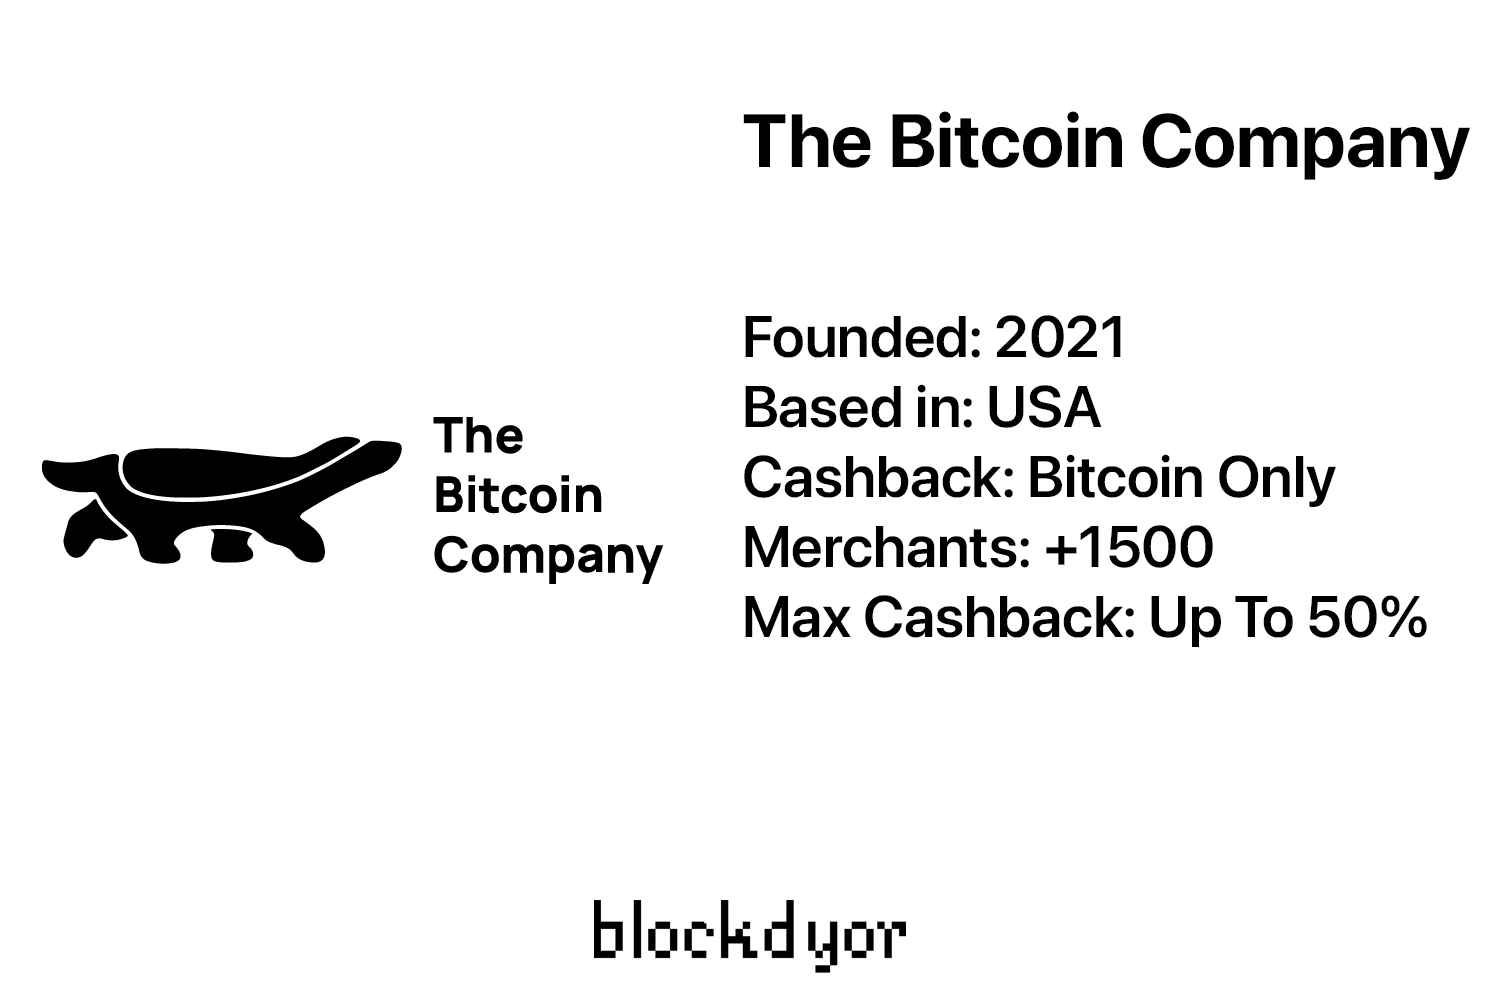 The Bitcoin Company Overview